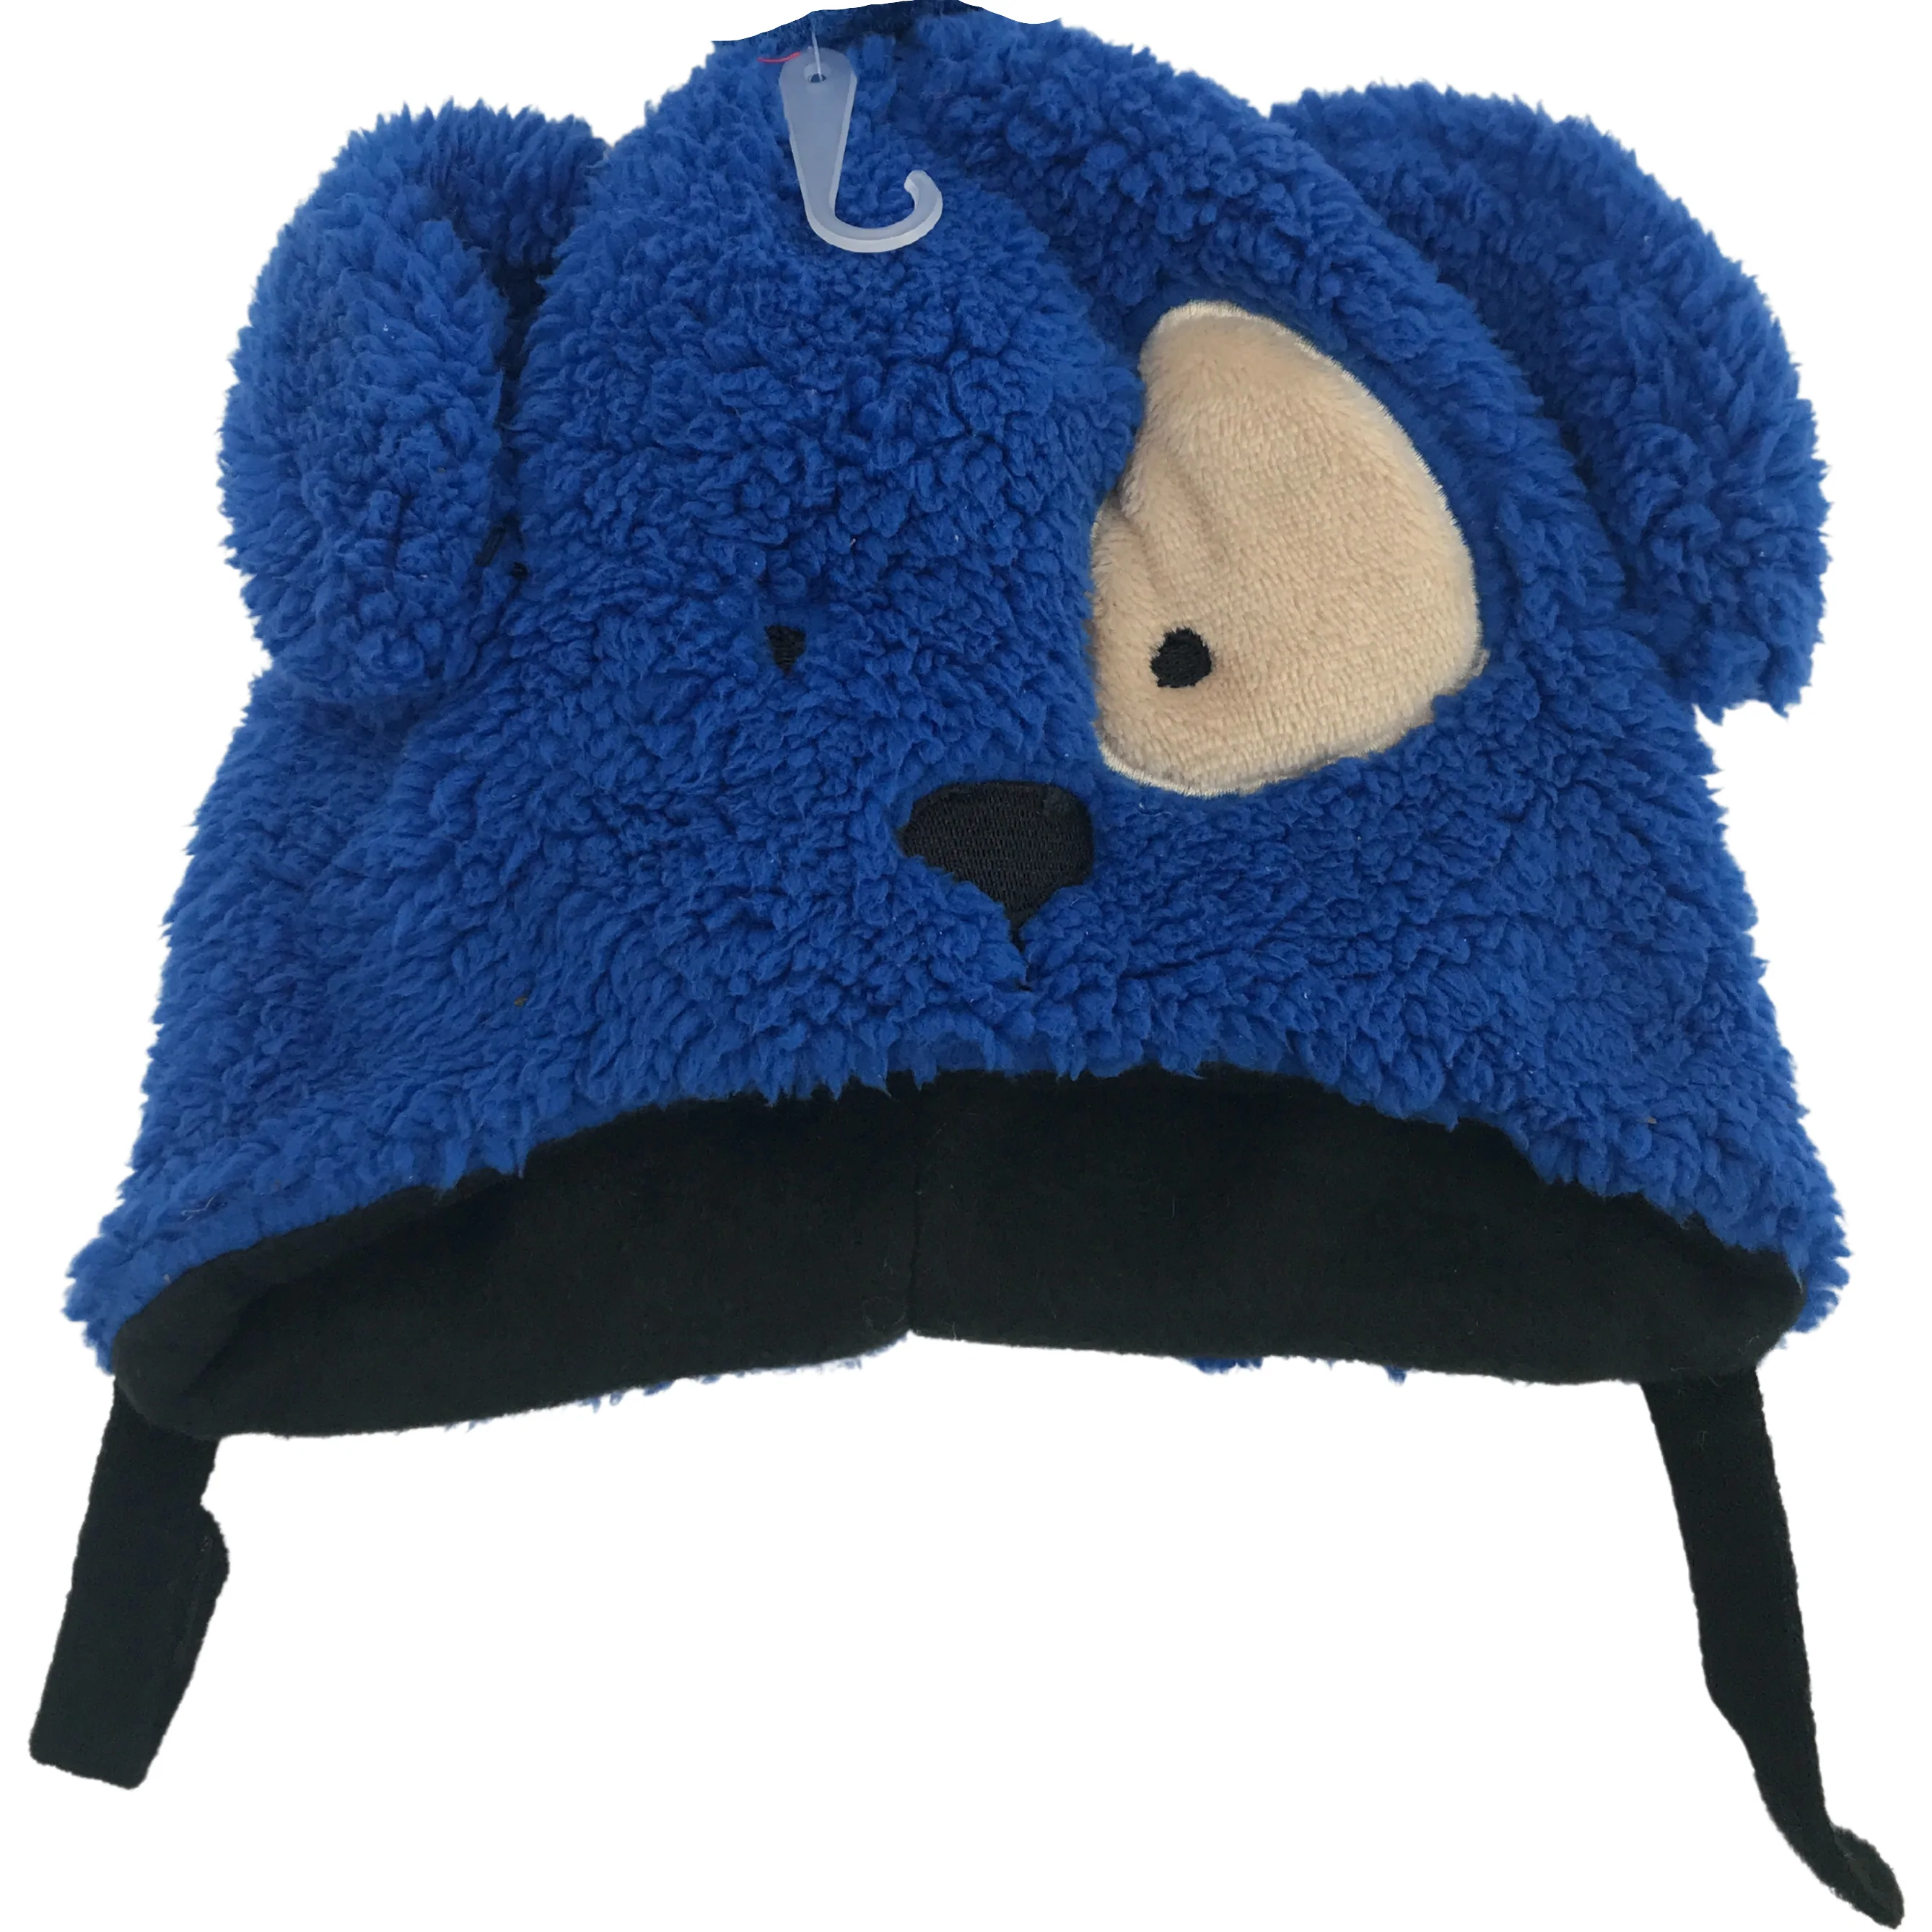 Children's Hat and Mitten Set / Blue Dog / Hat with Chin Strap / Various Sizes